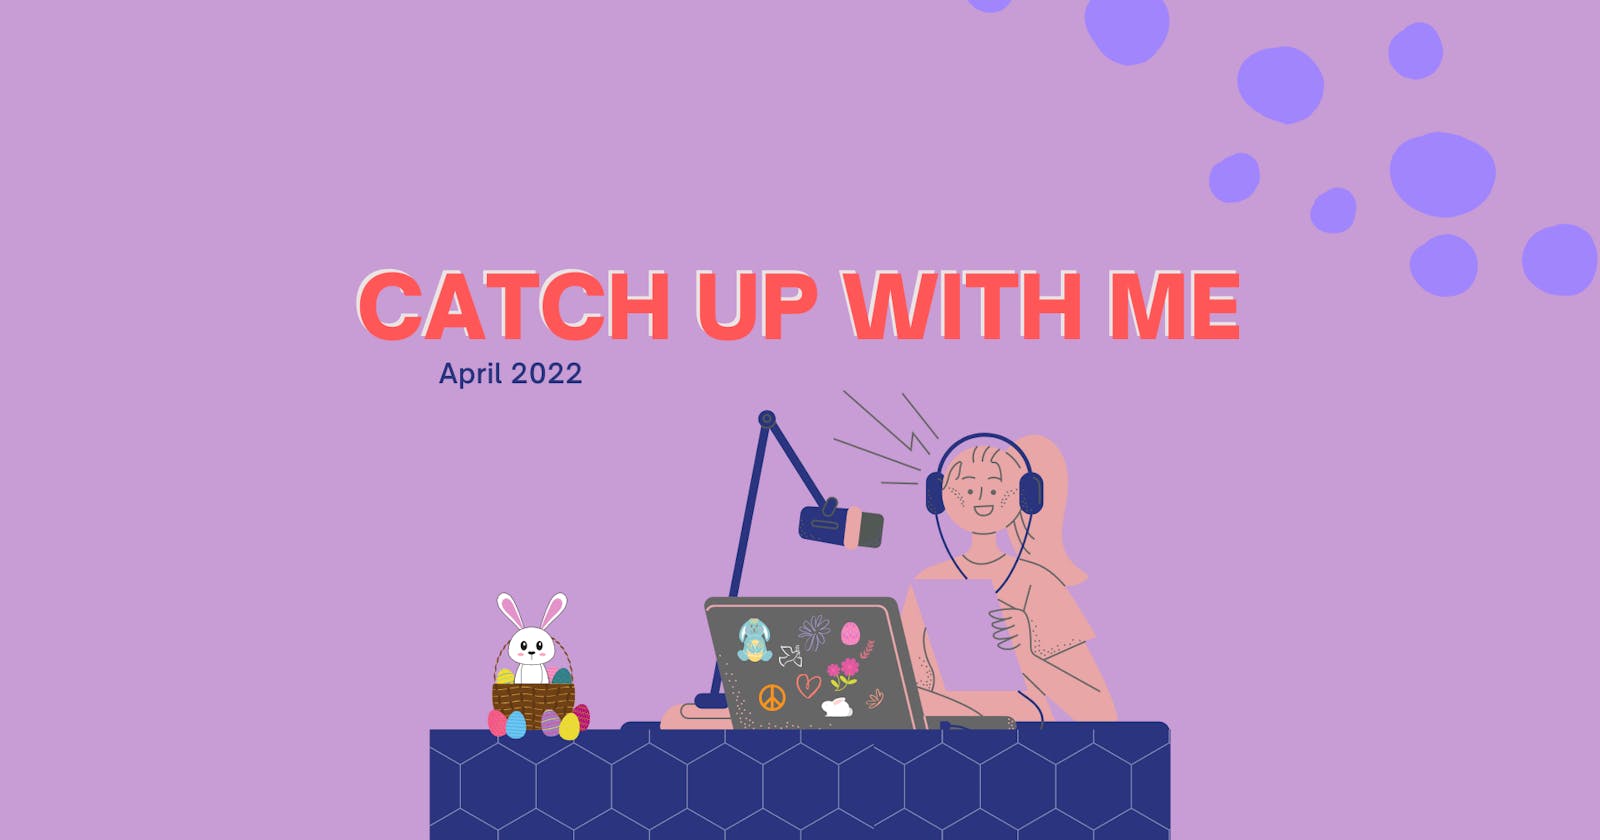 Catch up with me - April 2022